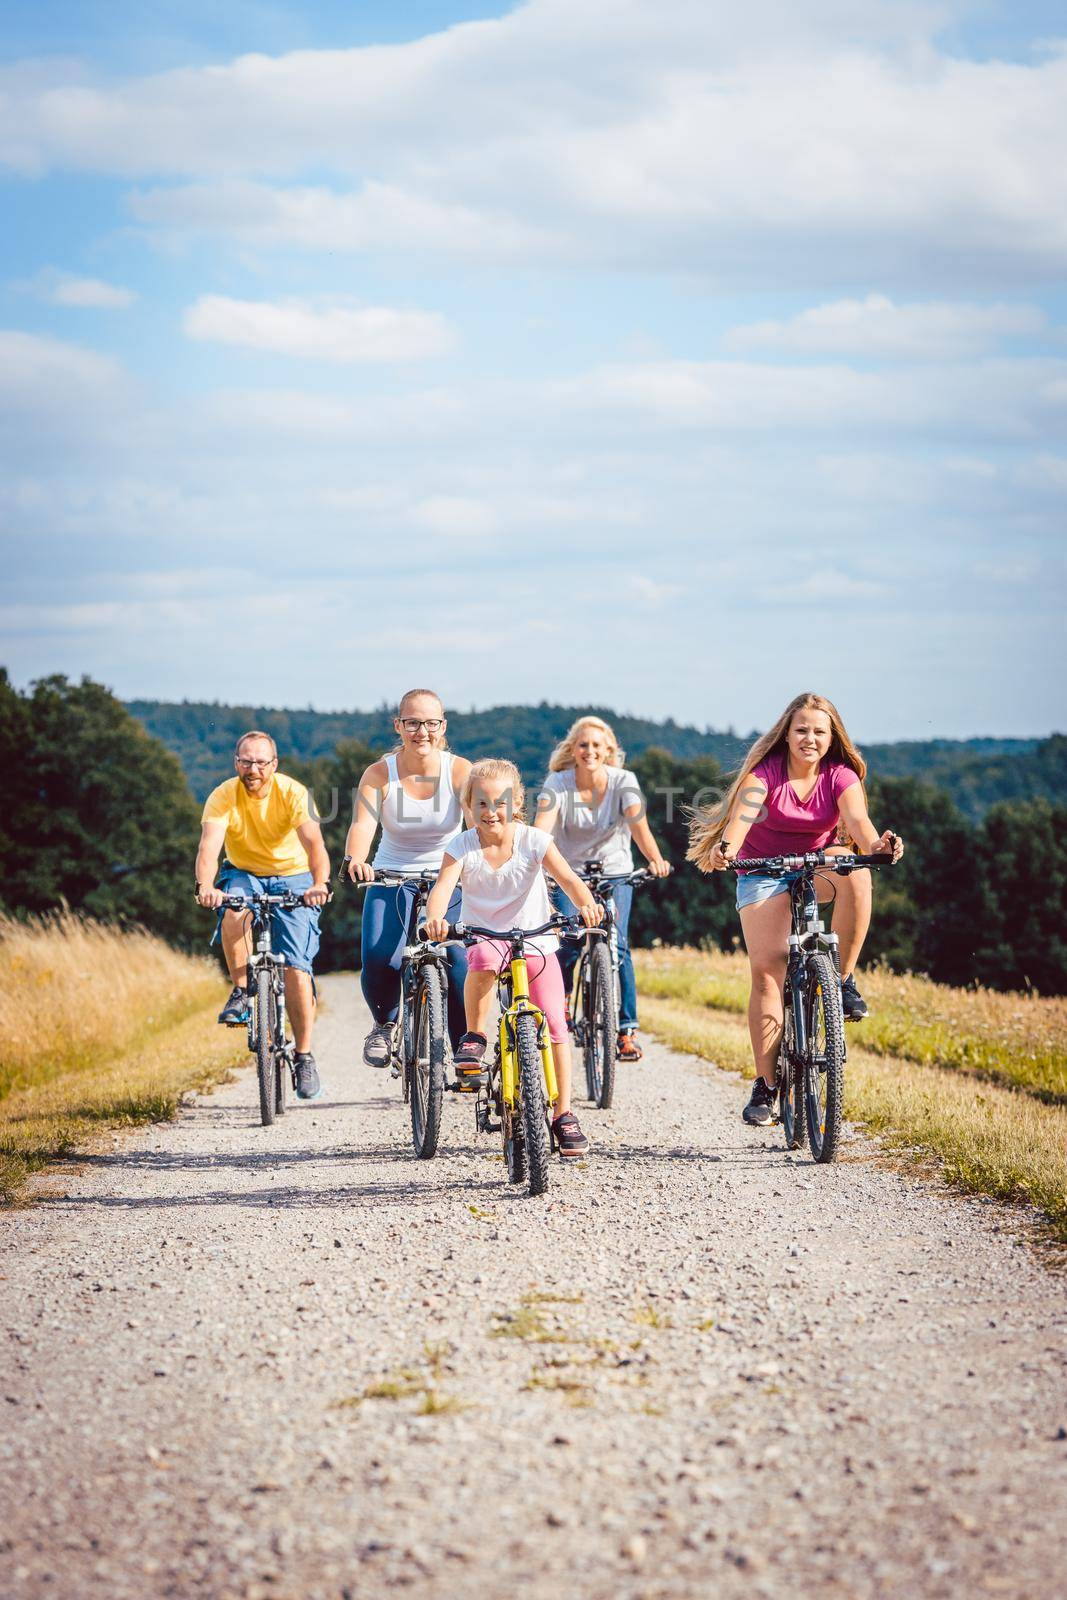 Family riding their bicycles on afternoon in the summer countryside